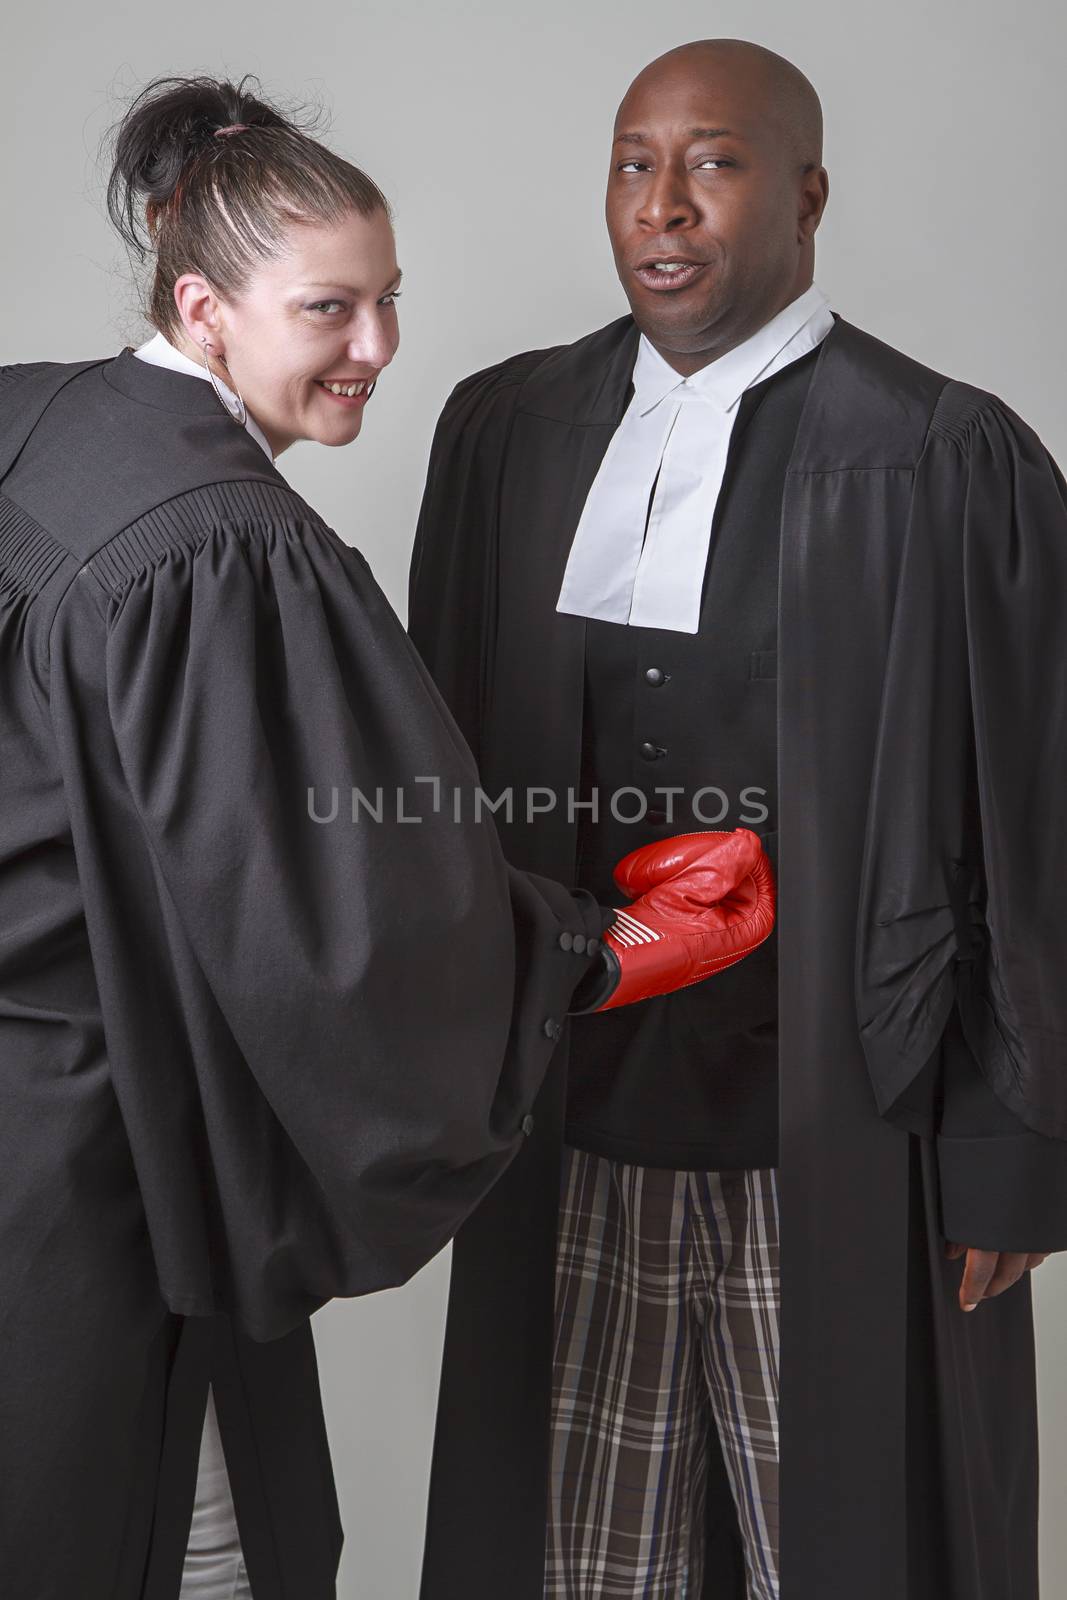 a woman lawyer punching a man lawyer into the guts